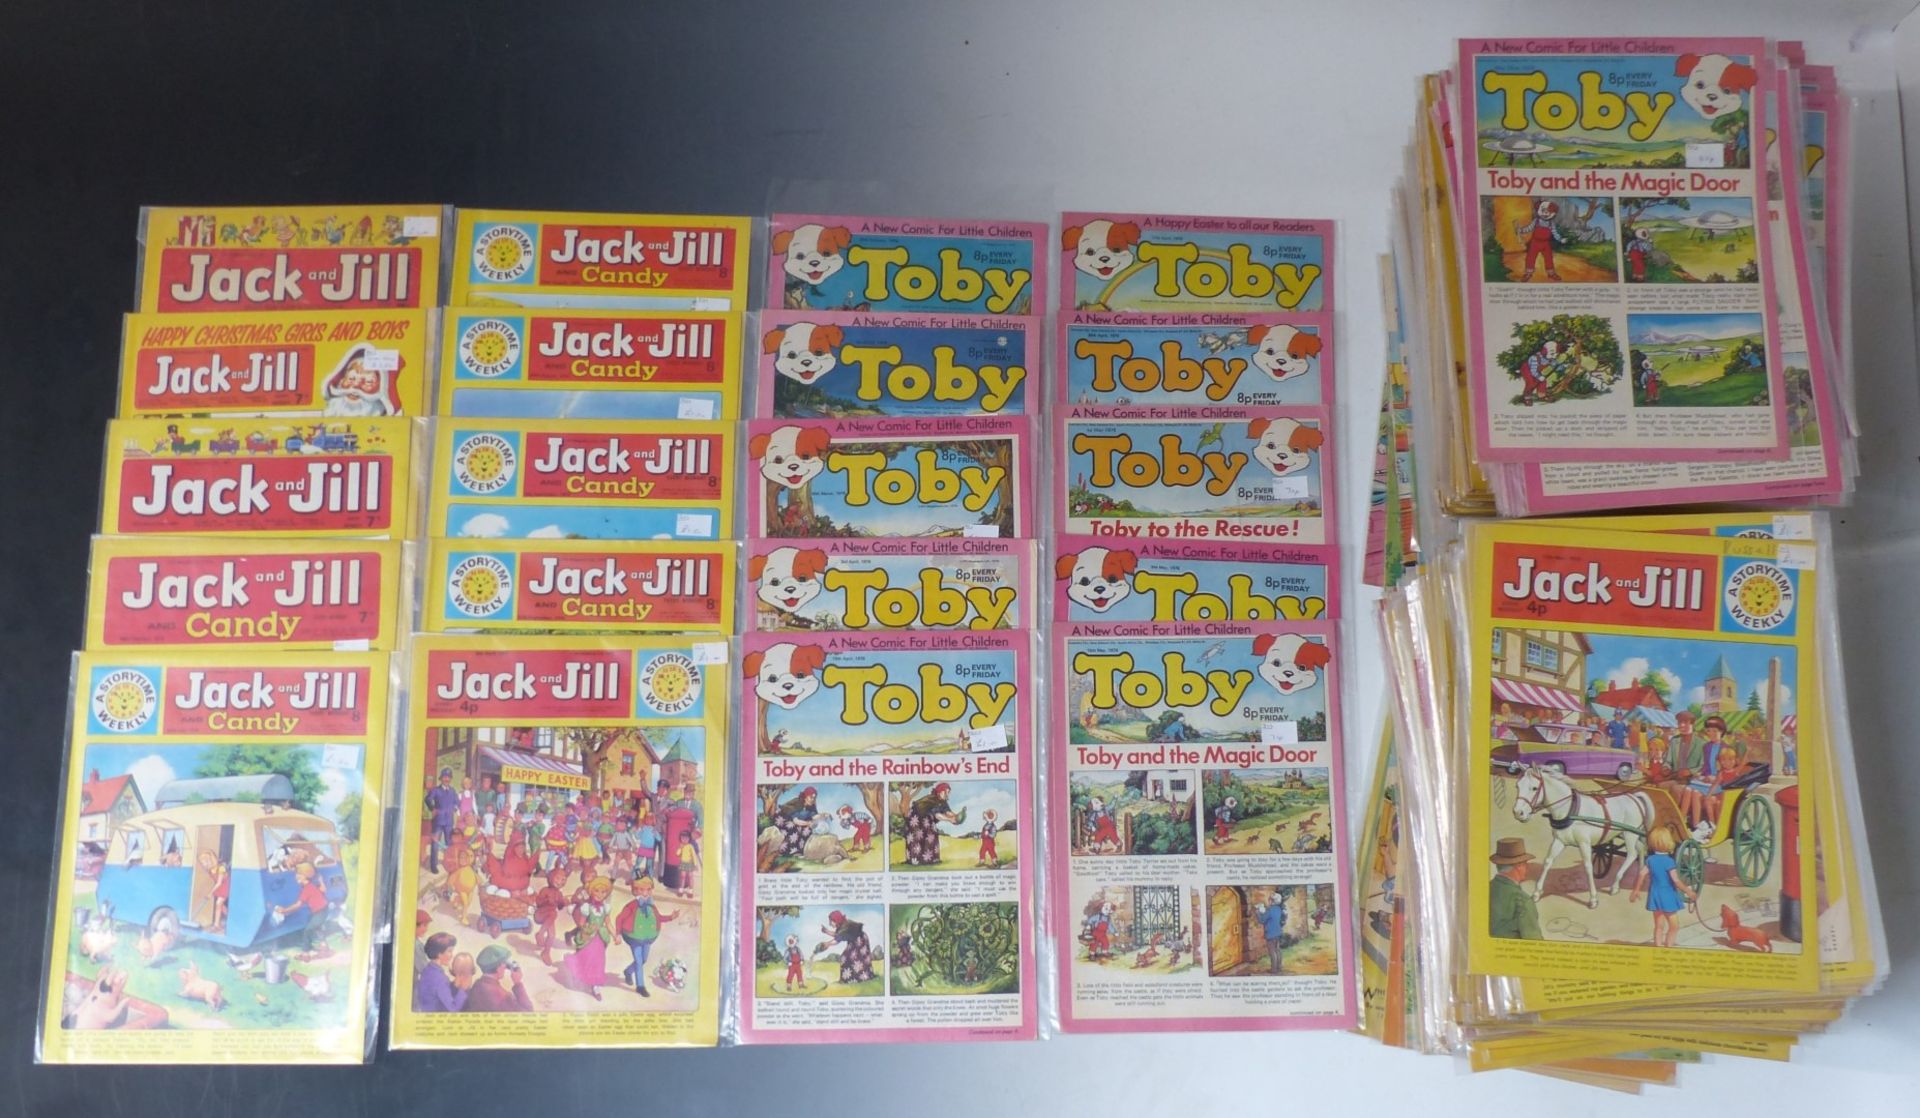 Over 400 children's comics including Little Star, Playhour, Jack and Jill, Bimbo, Storytime,